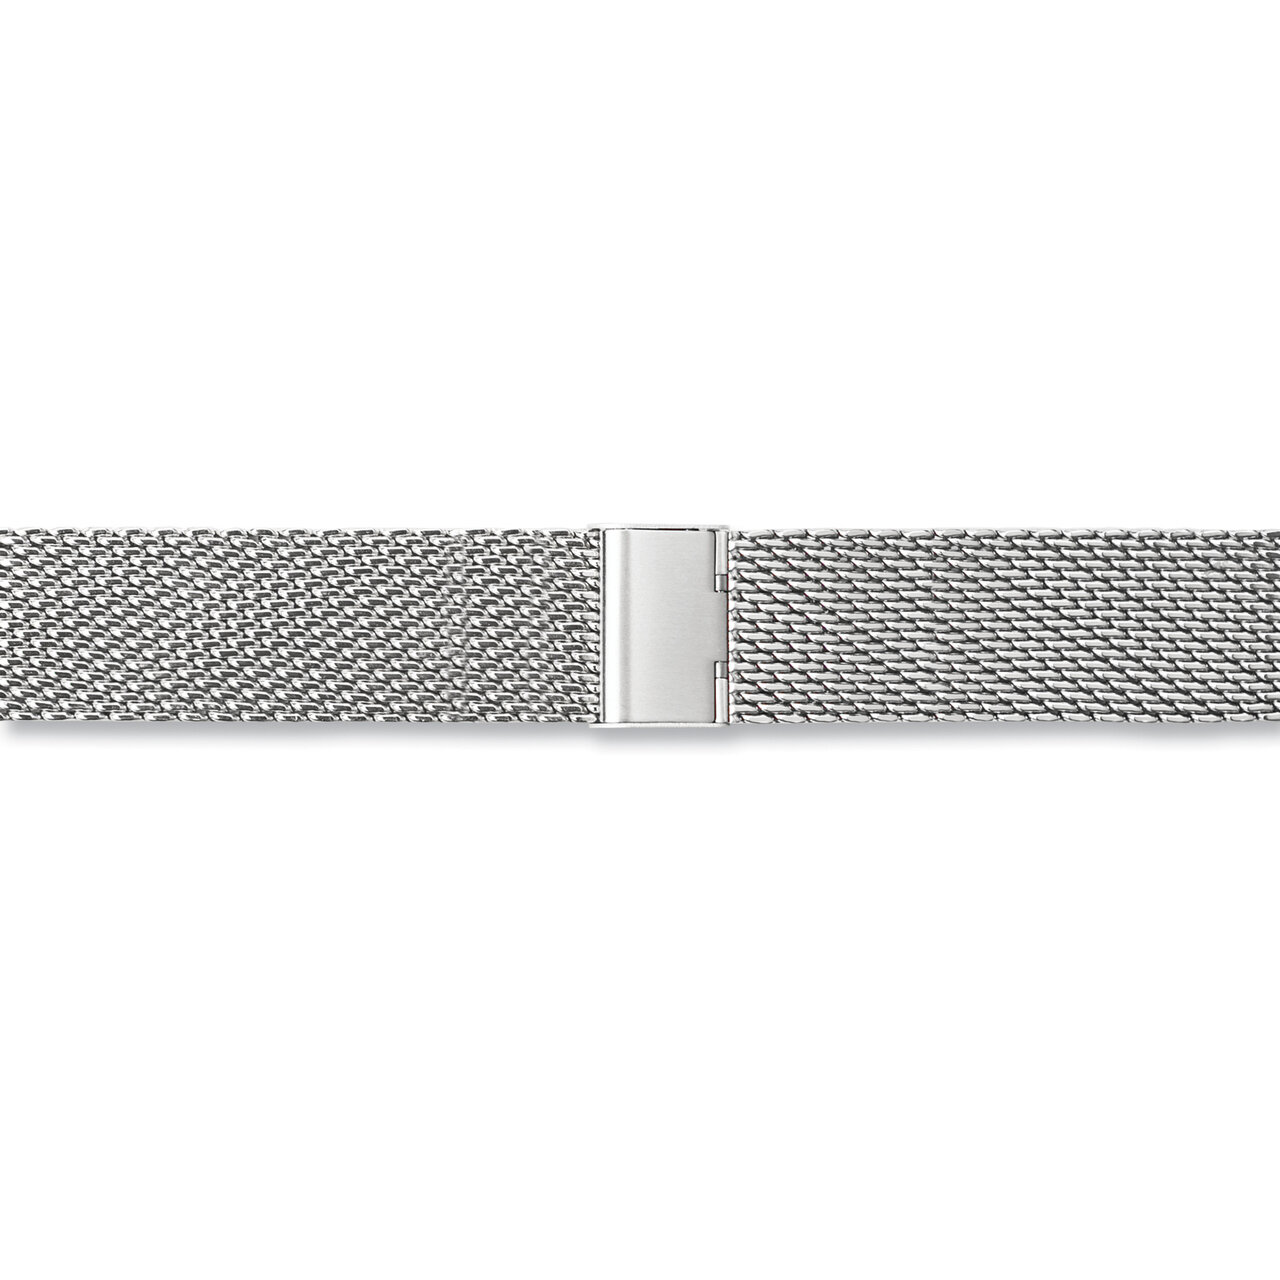 20mm Stainless Steel Mesh with Deployment Clasp Watch Band BA416-20